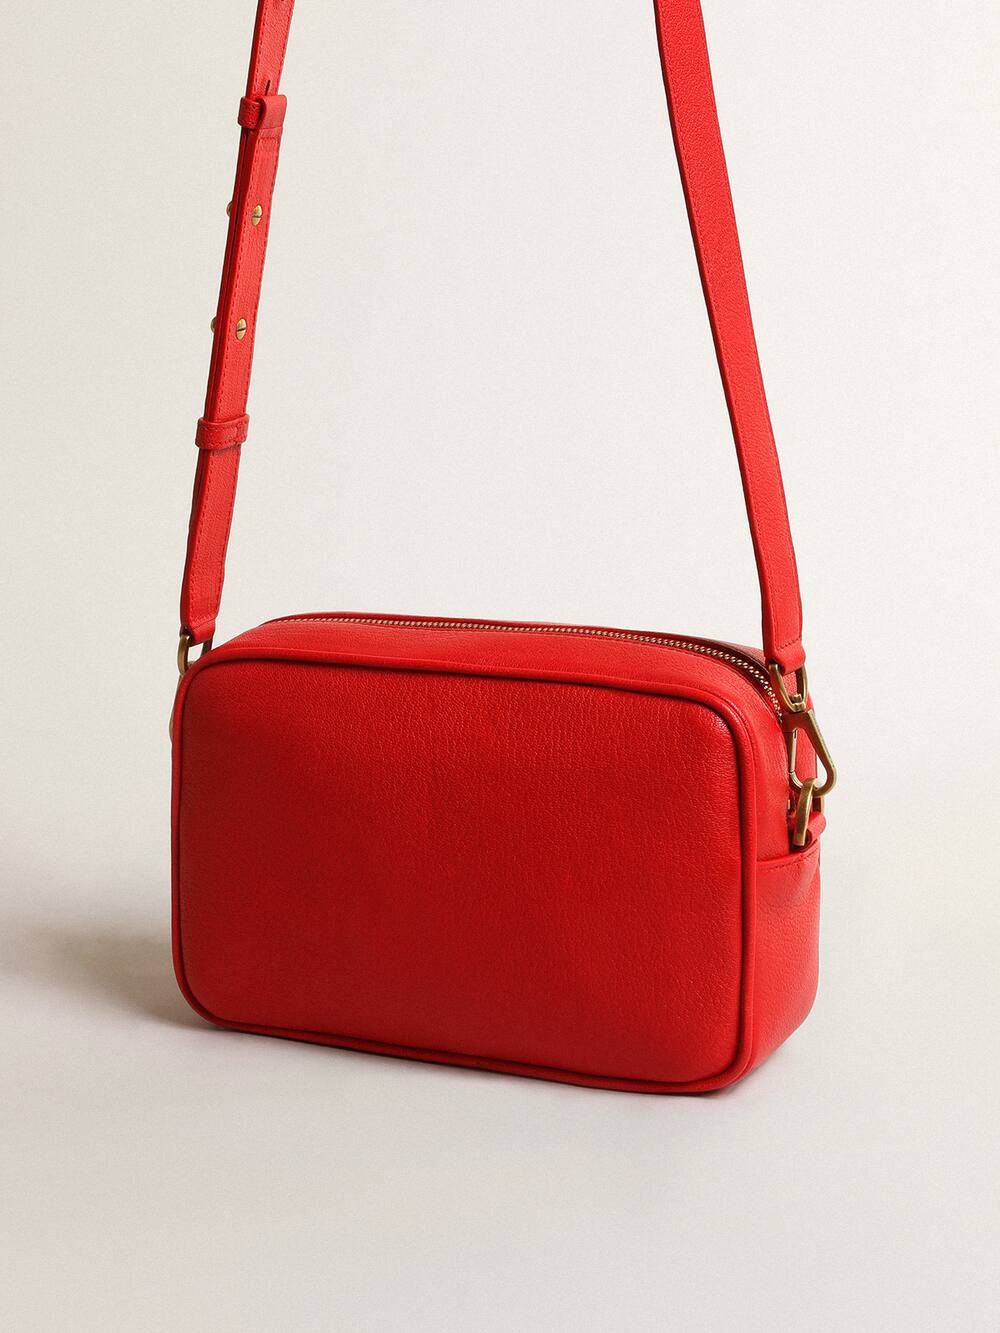 Golden Goose - Star Bag Donna in pelle color rosso acceso in 